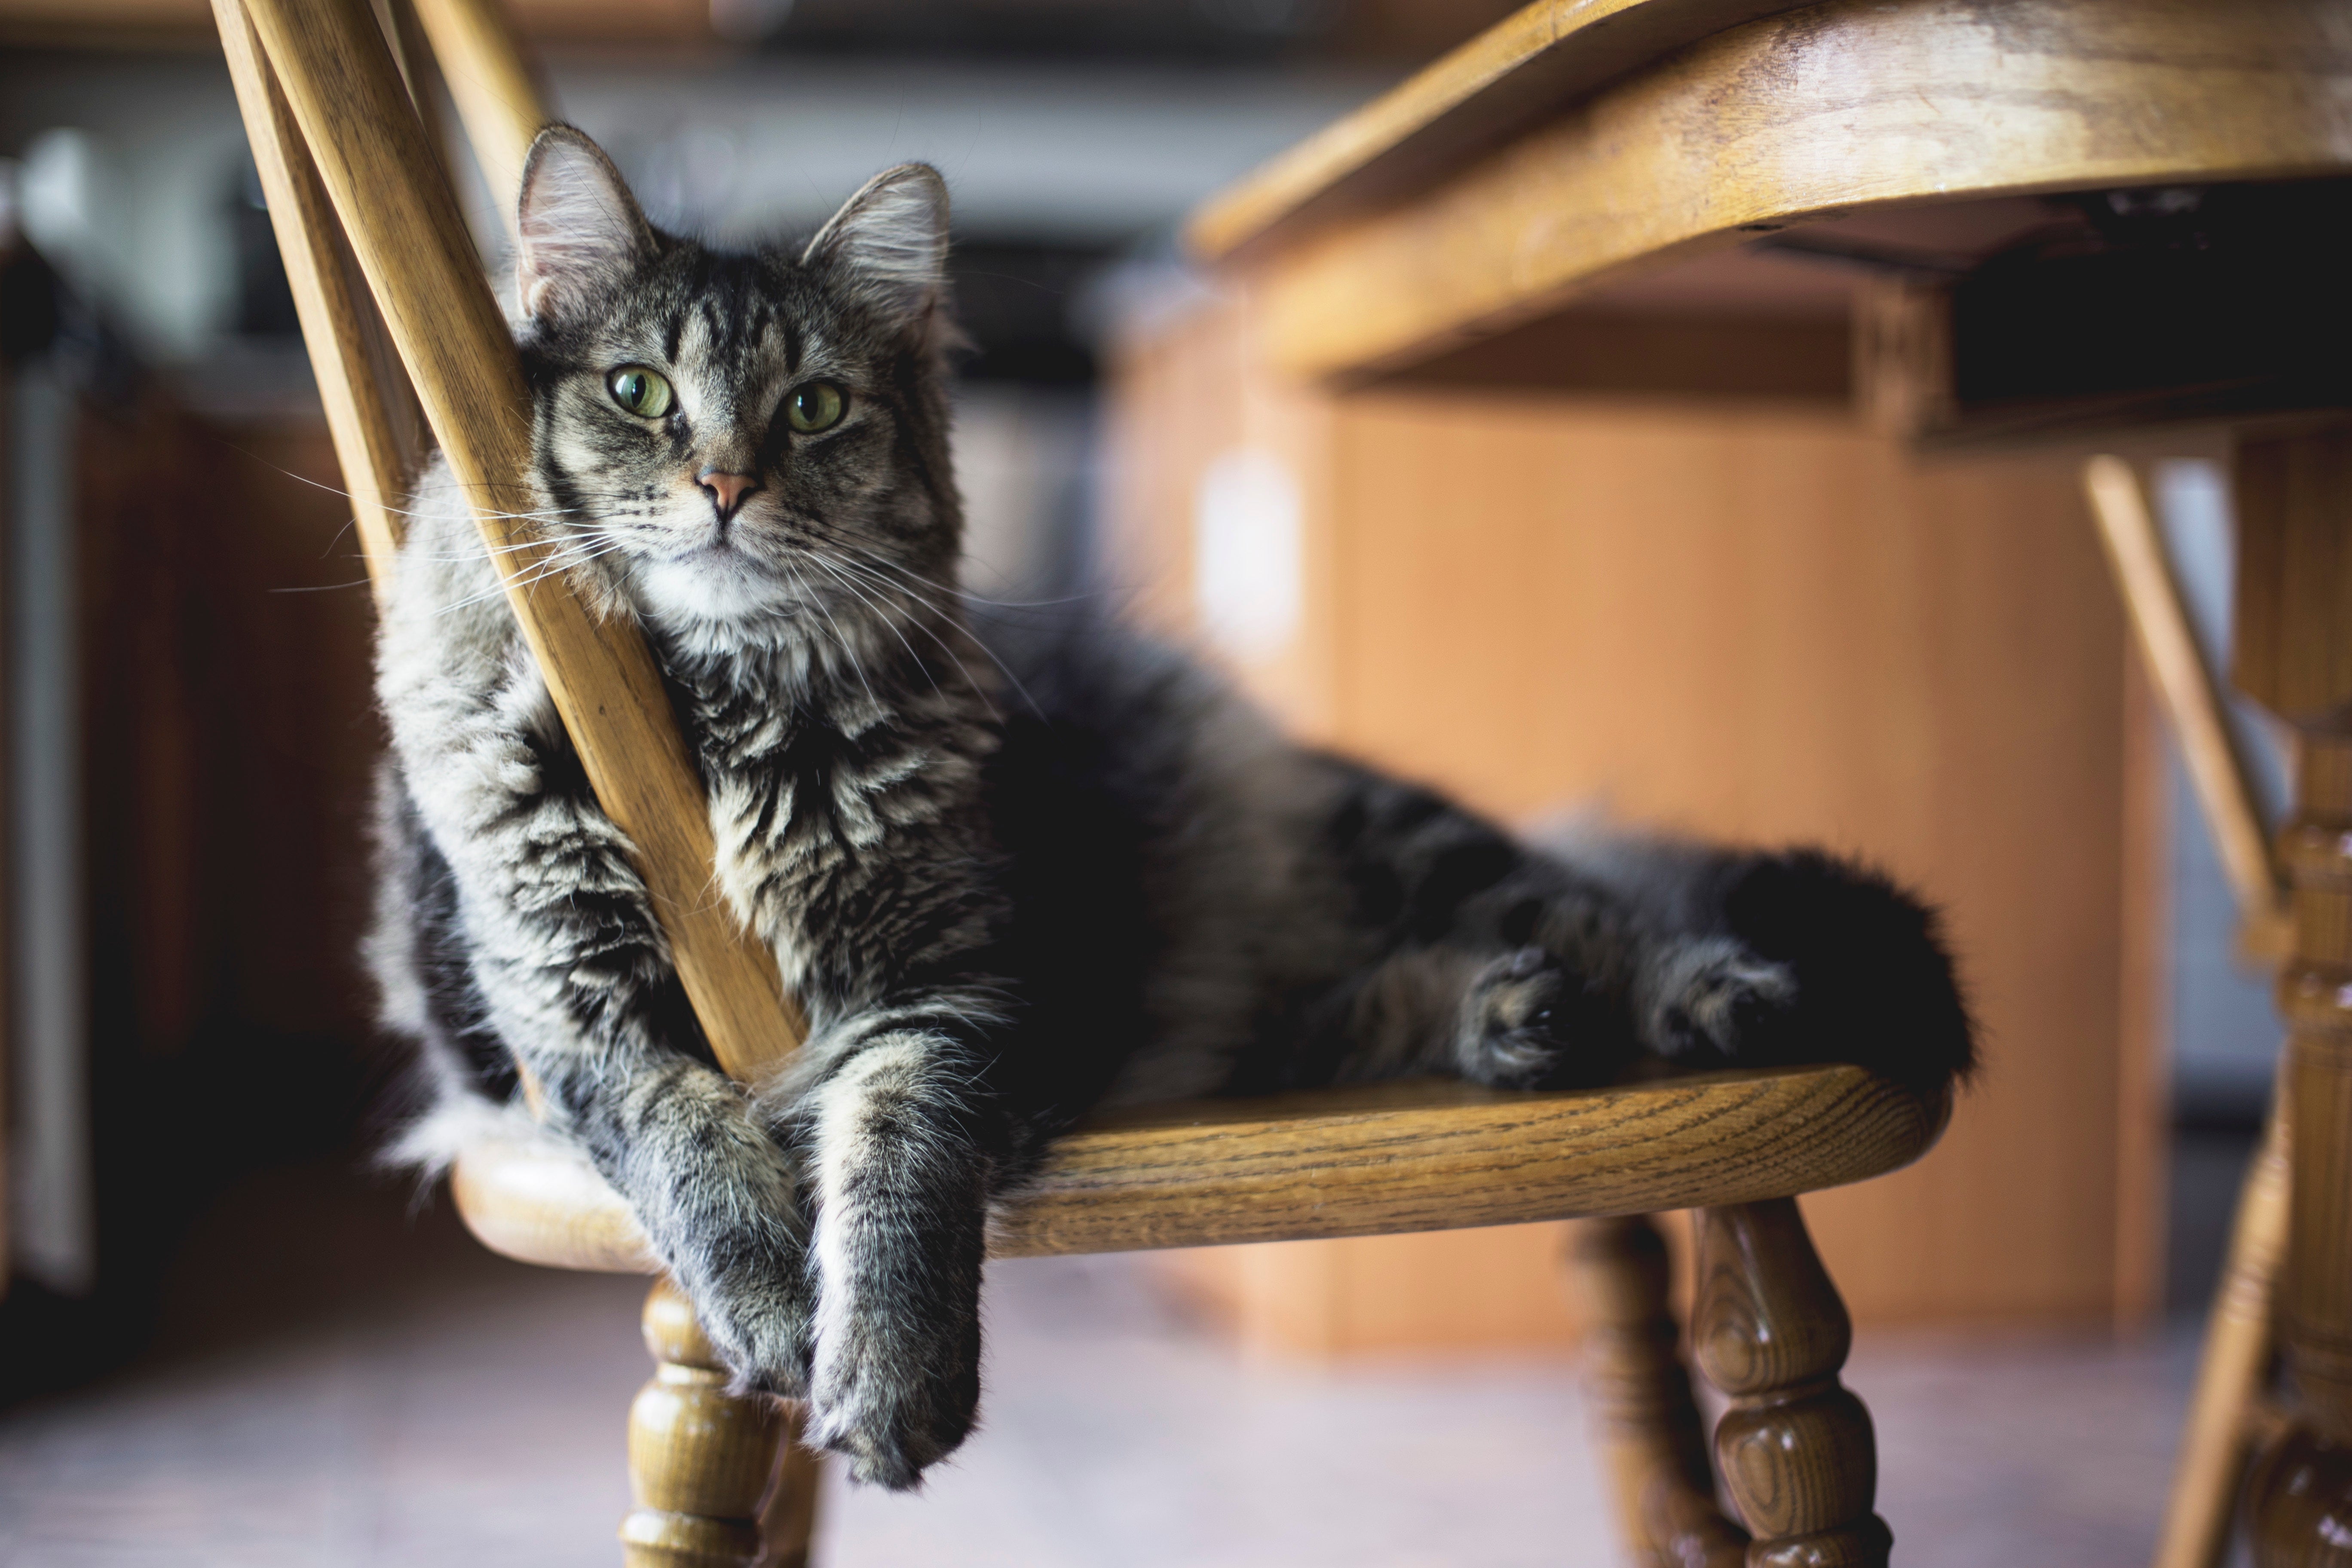 Relaxed grey cat slunk on wooden chair